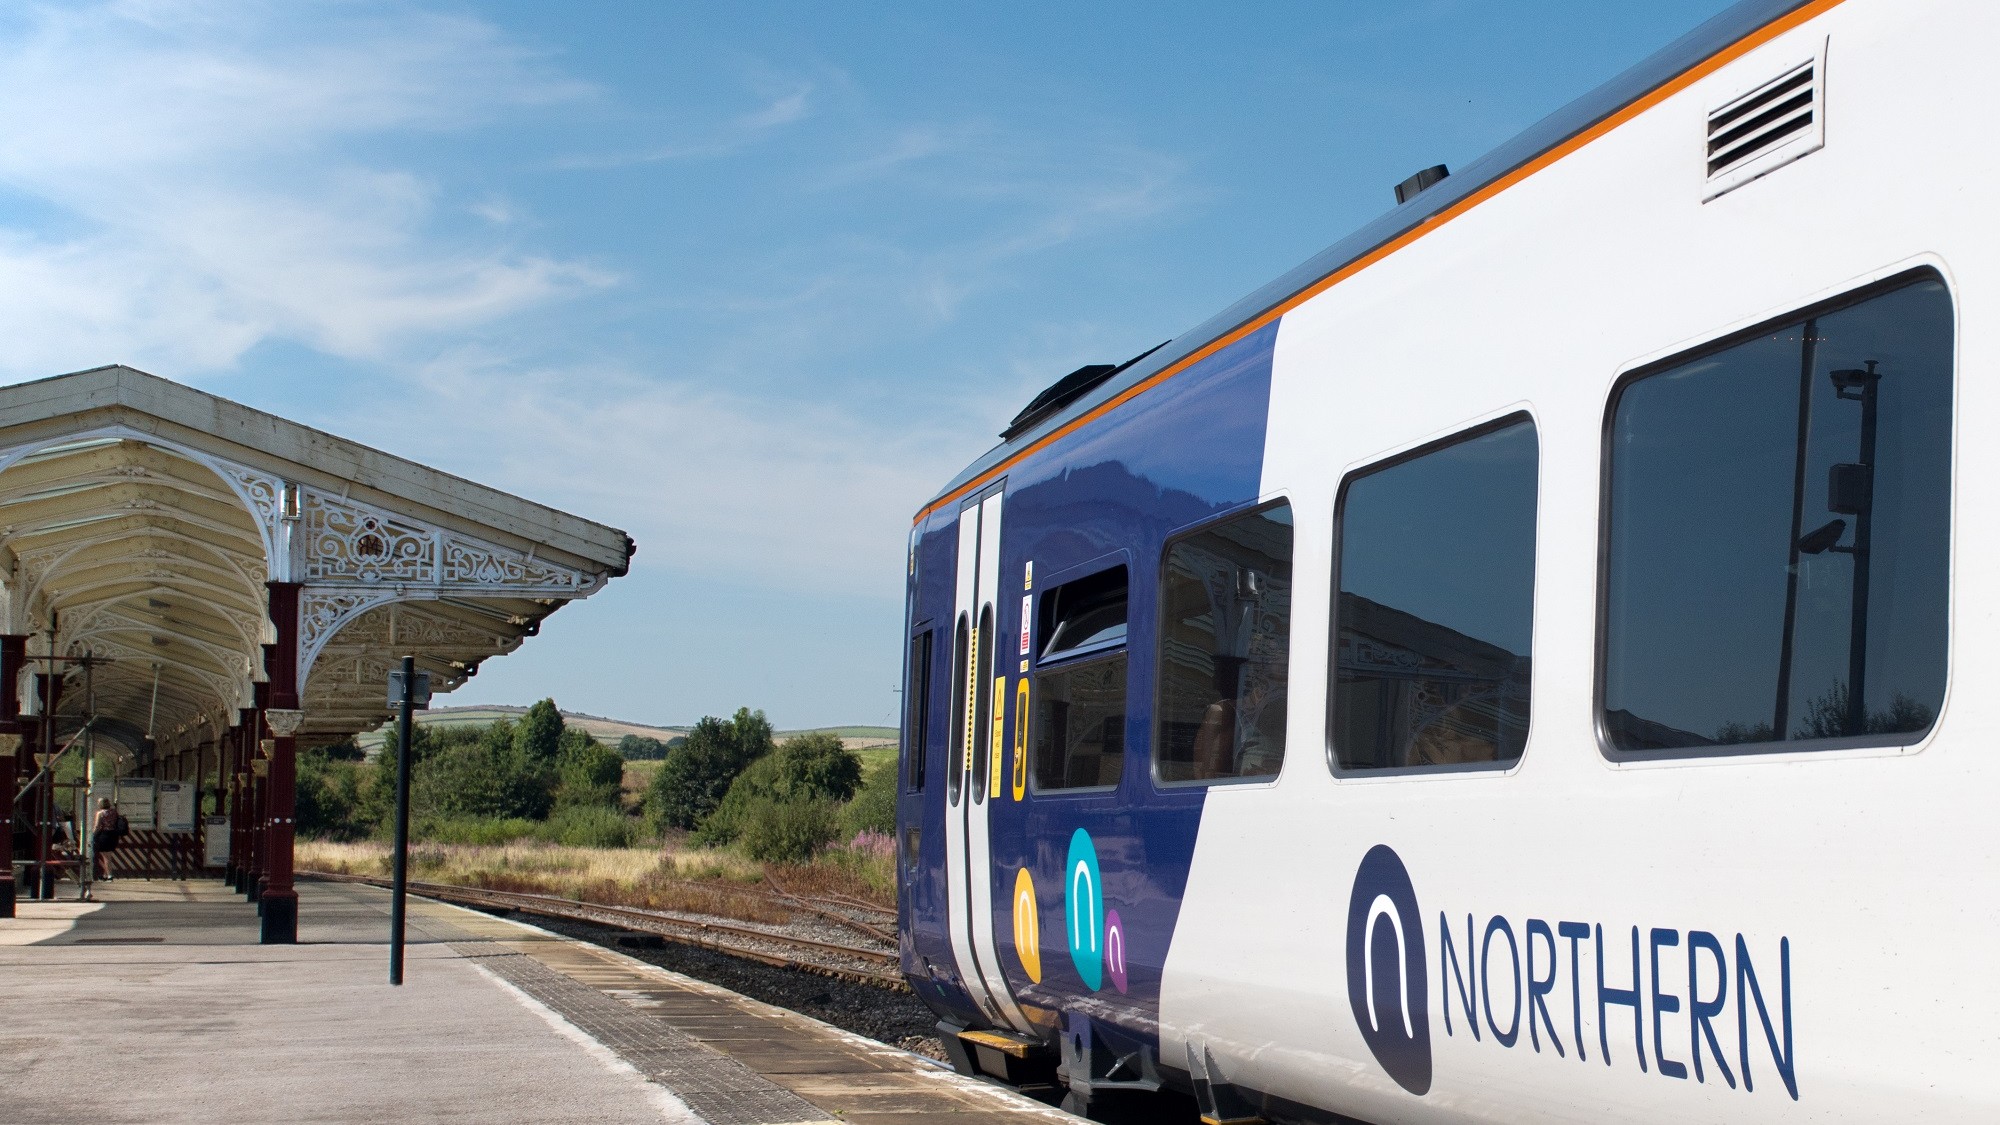 Image shows Northern train at station - July 2023